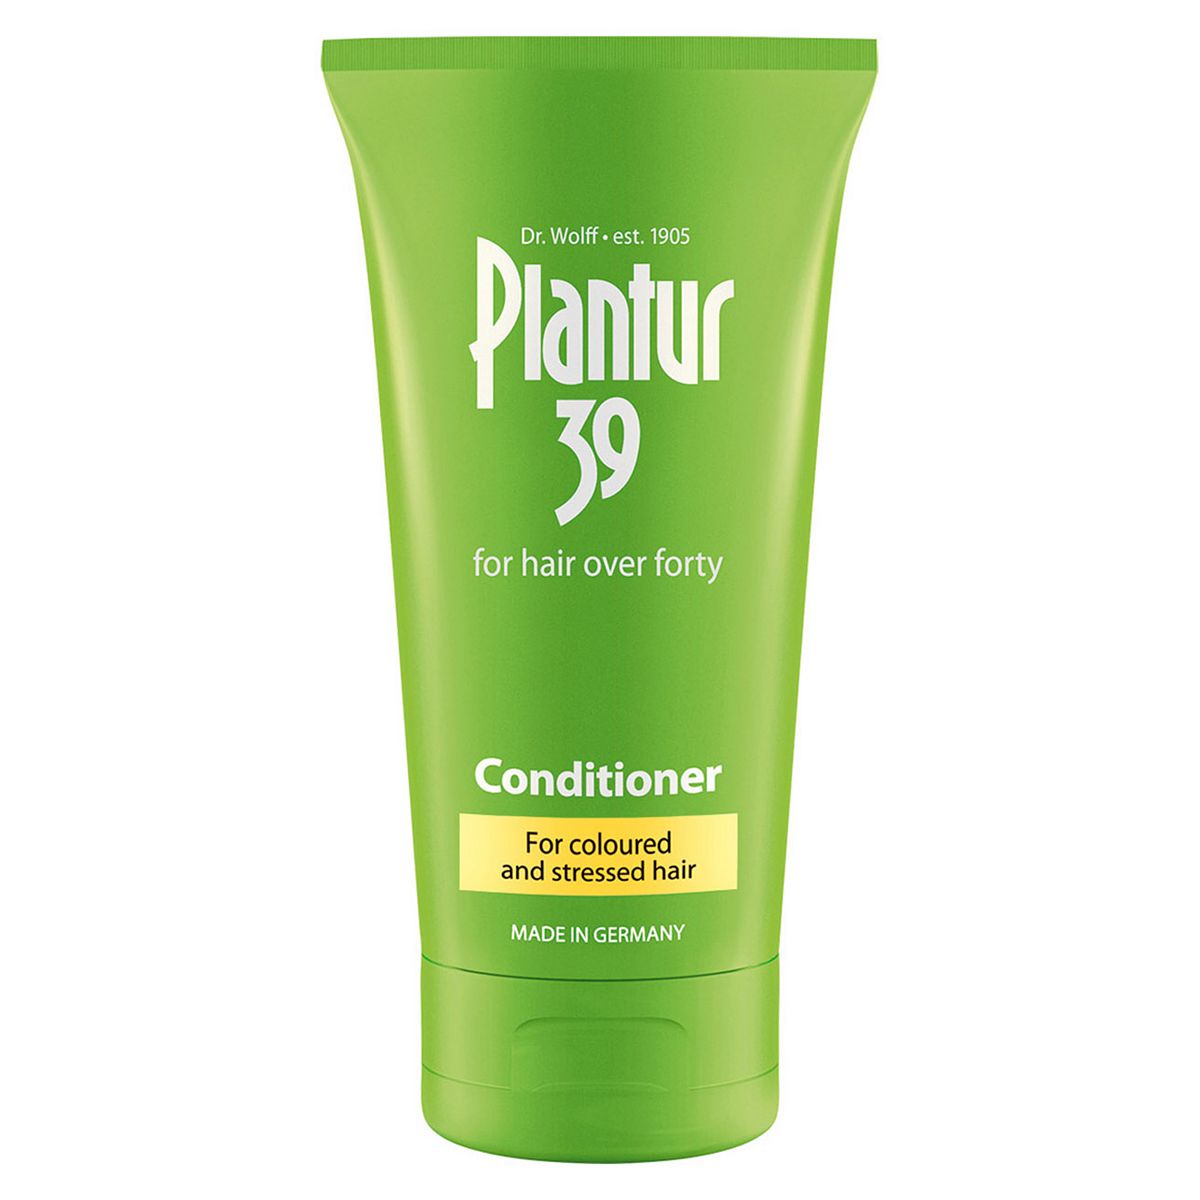 Plantur 39 Conditioner for coloured and stressed hair 150ml GOODS Boots   